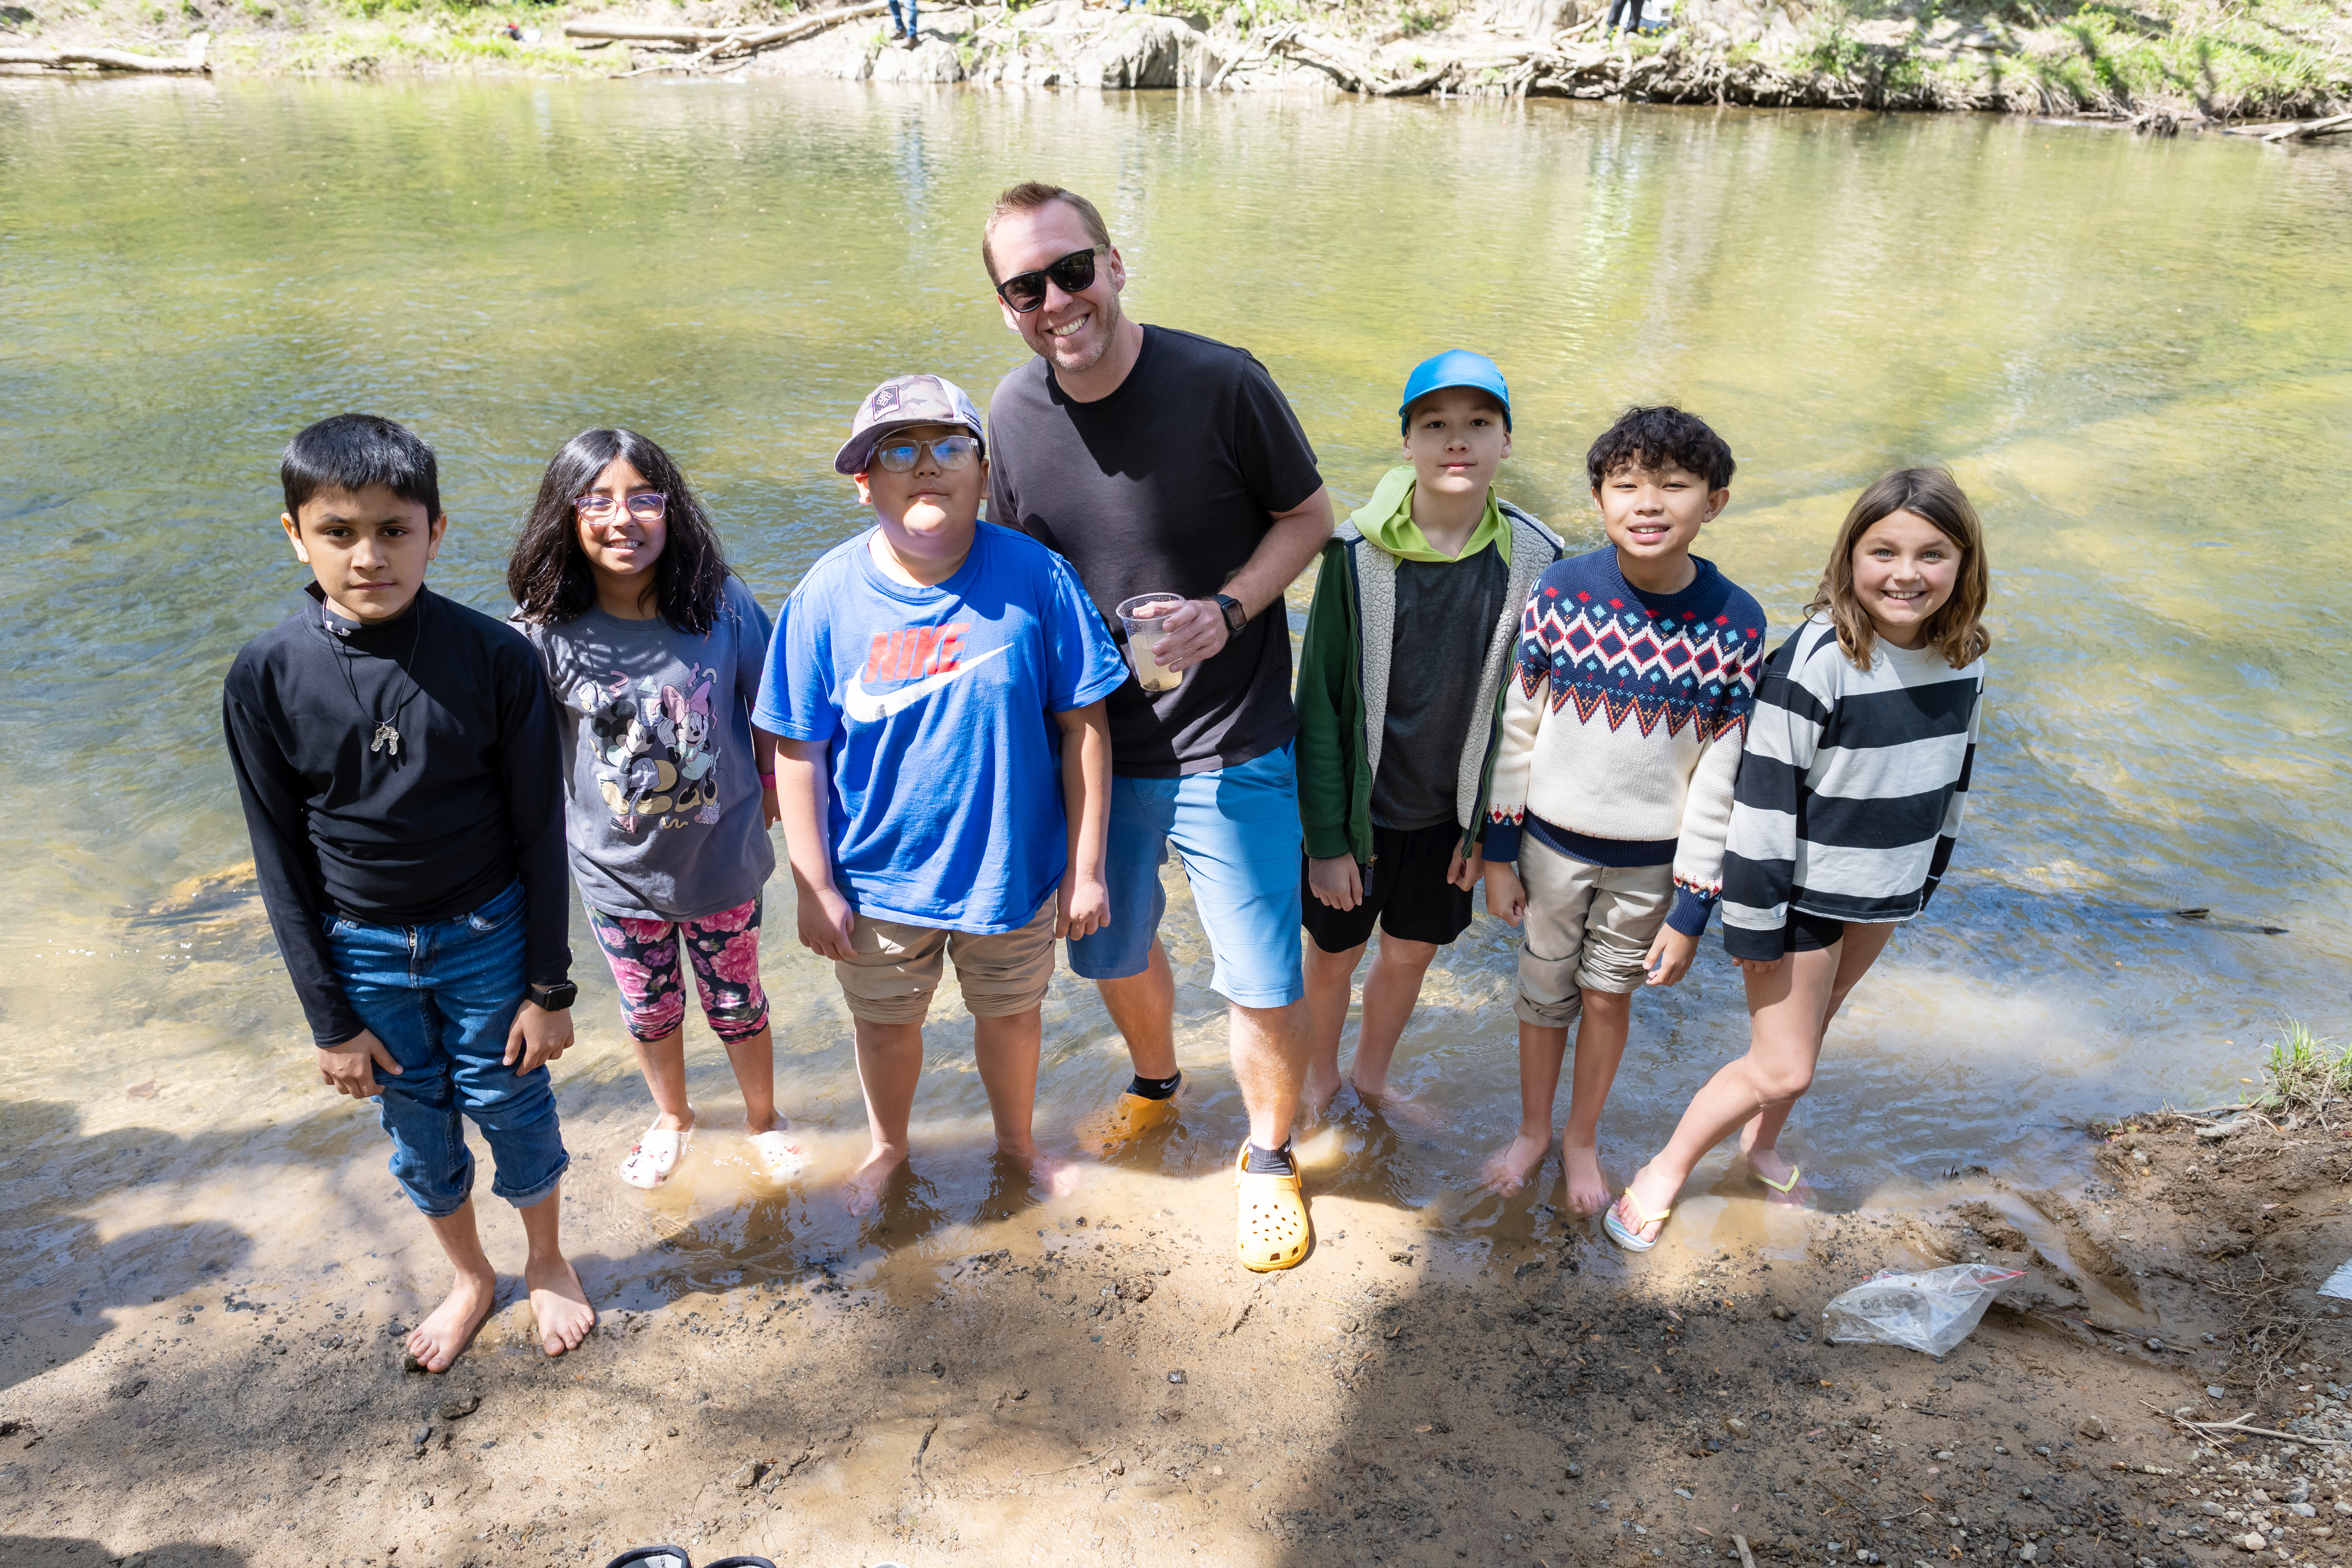 Students smile with Centreville Elementary School principal, Josh Douds, center. Douds holds a fry in a cup as he joins students for the trout release.